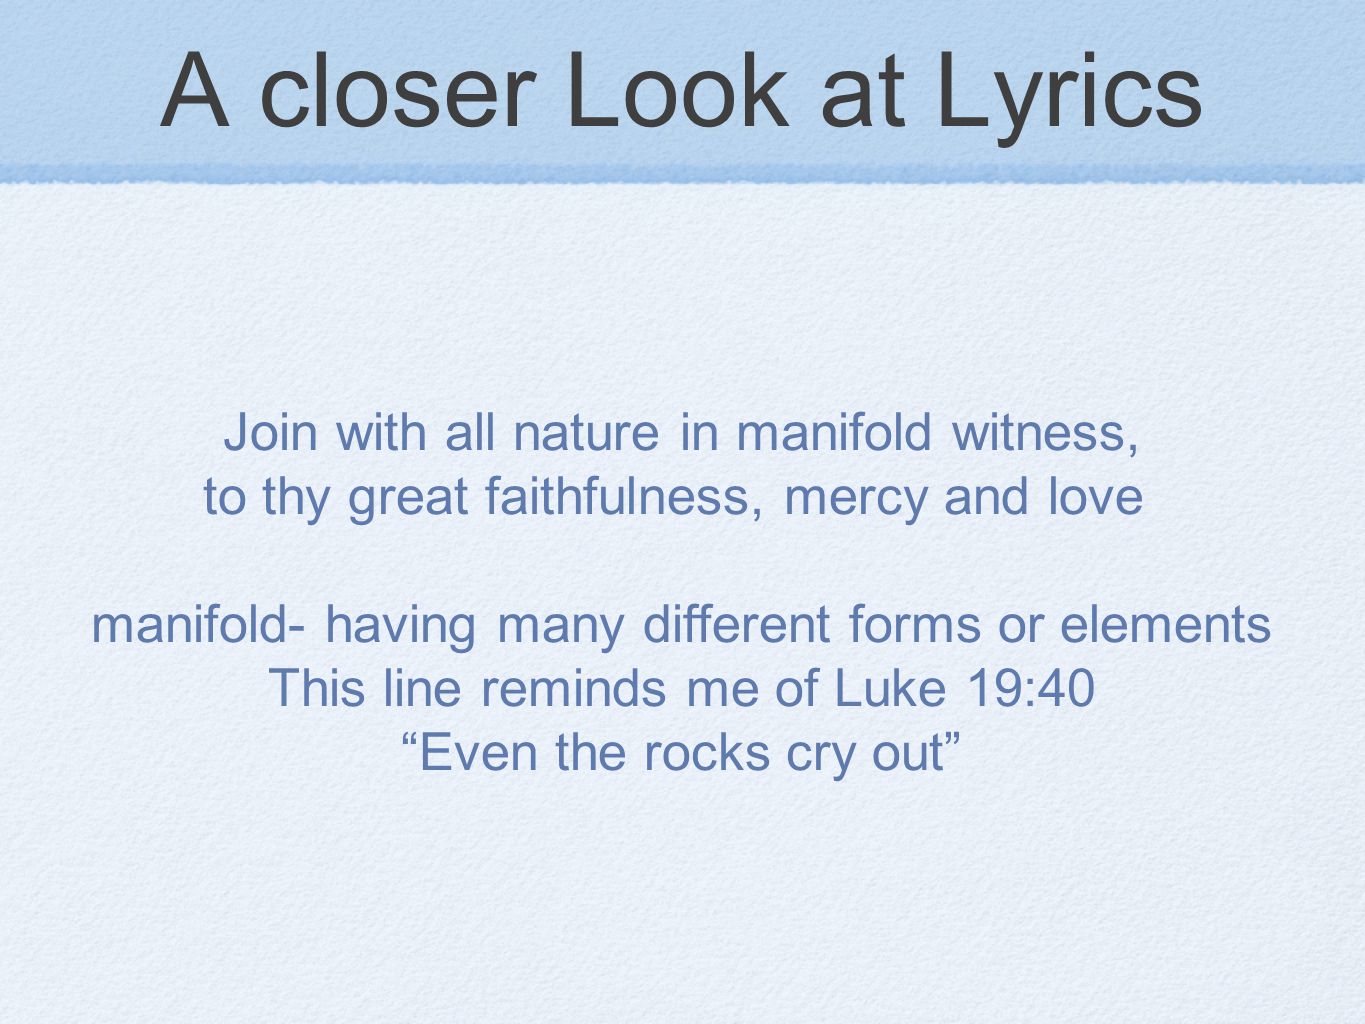 A closer Look at Lyrics Join with all nature in manifold witness, to thy great faithfulness, mercy and love manifold- having many different forms or elements This line reminds me of Luke 19:40 Even the rocks cry out